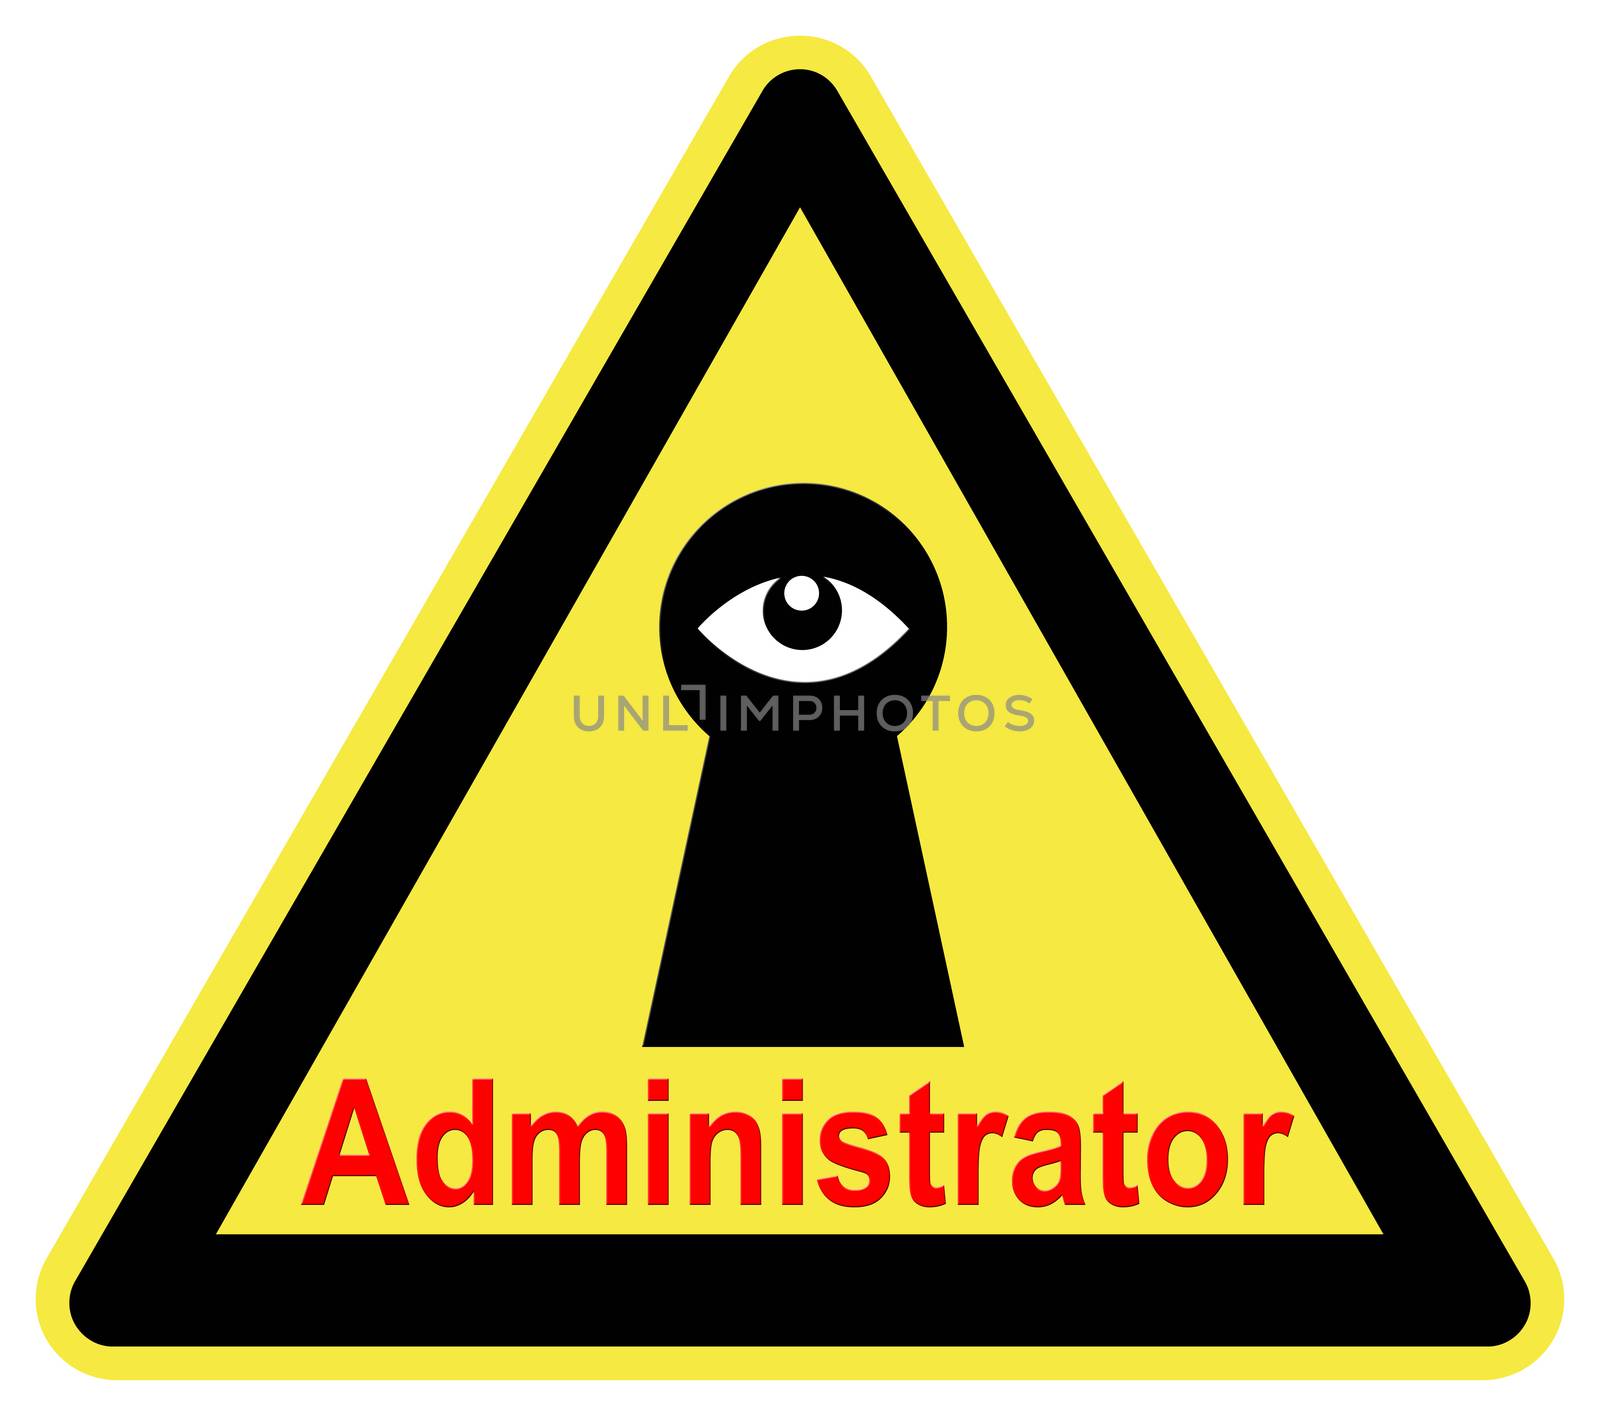 The Administrator is watching you by Bambara